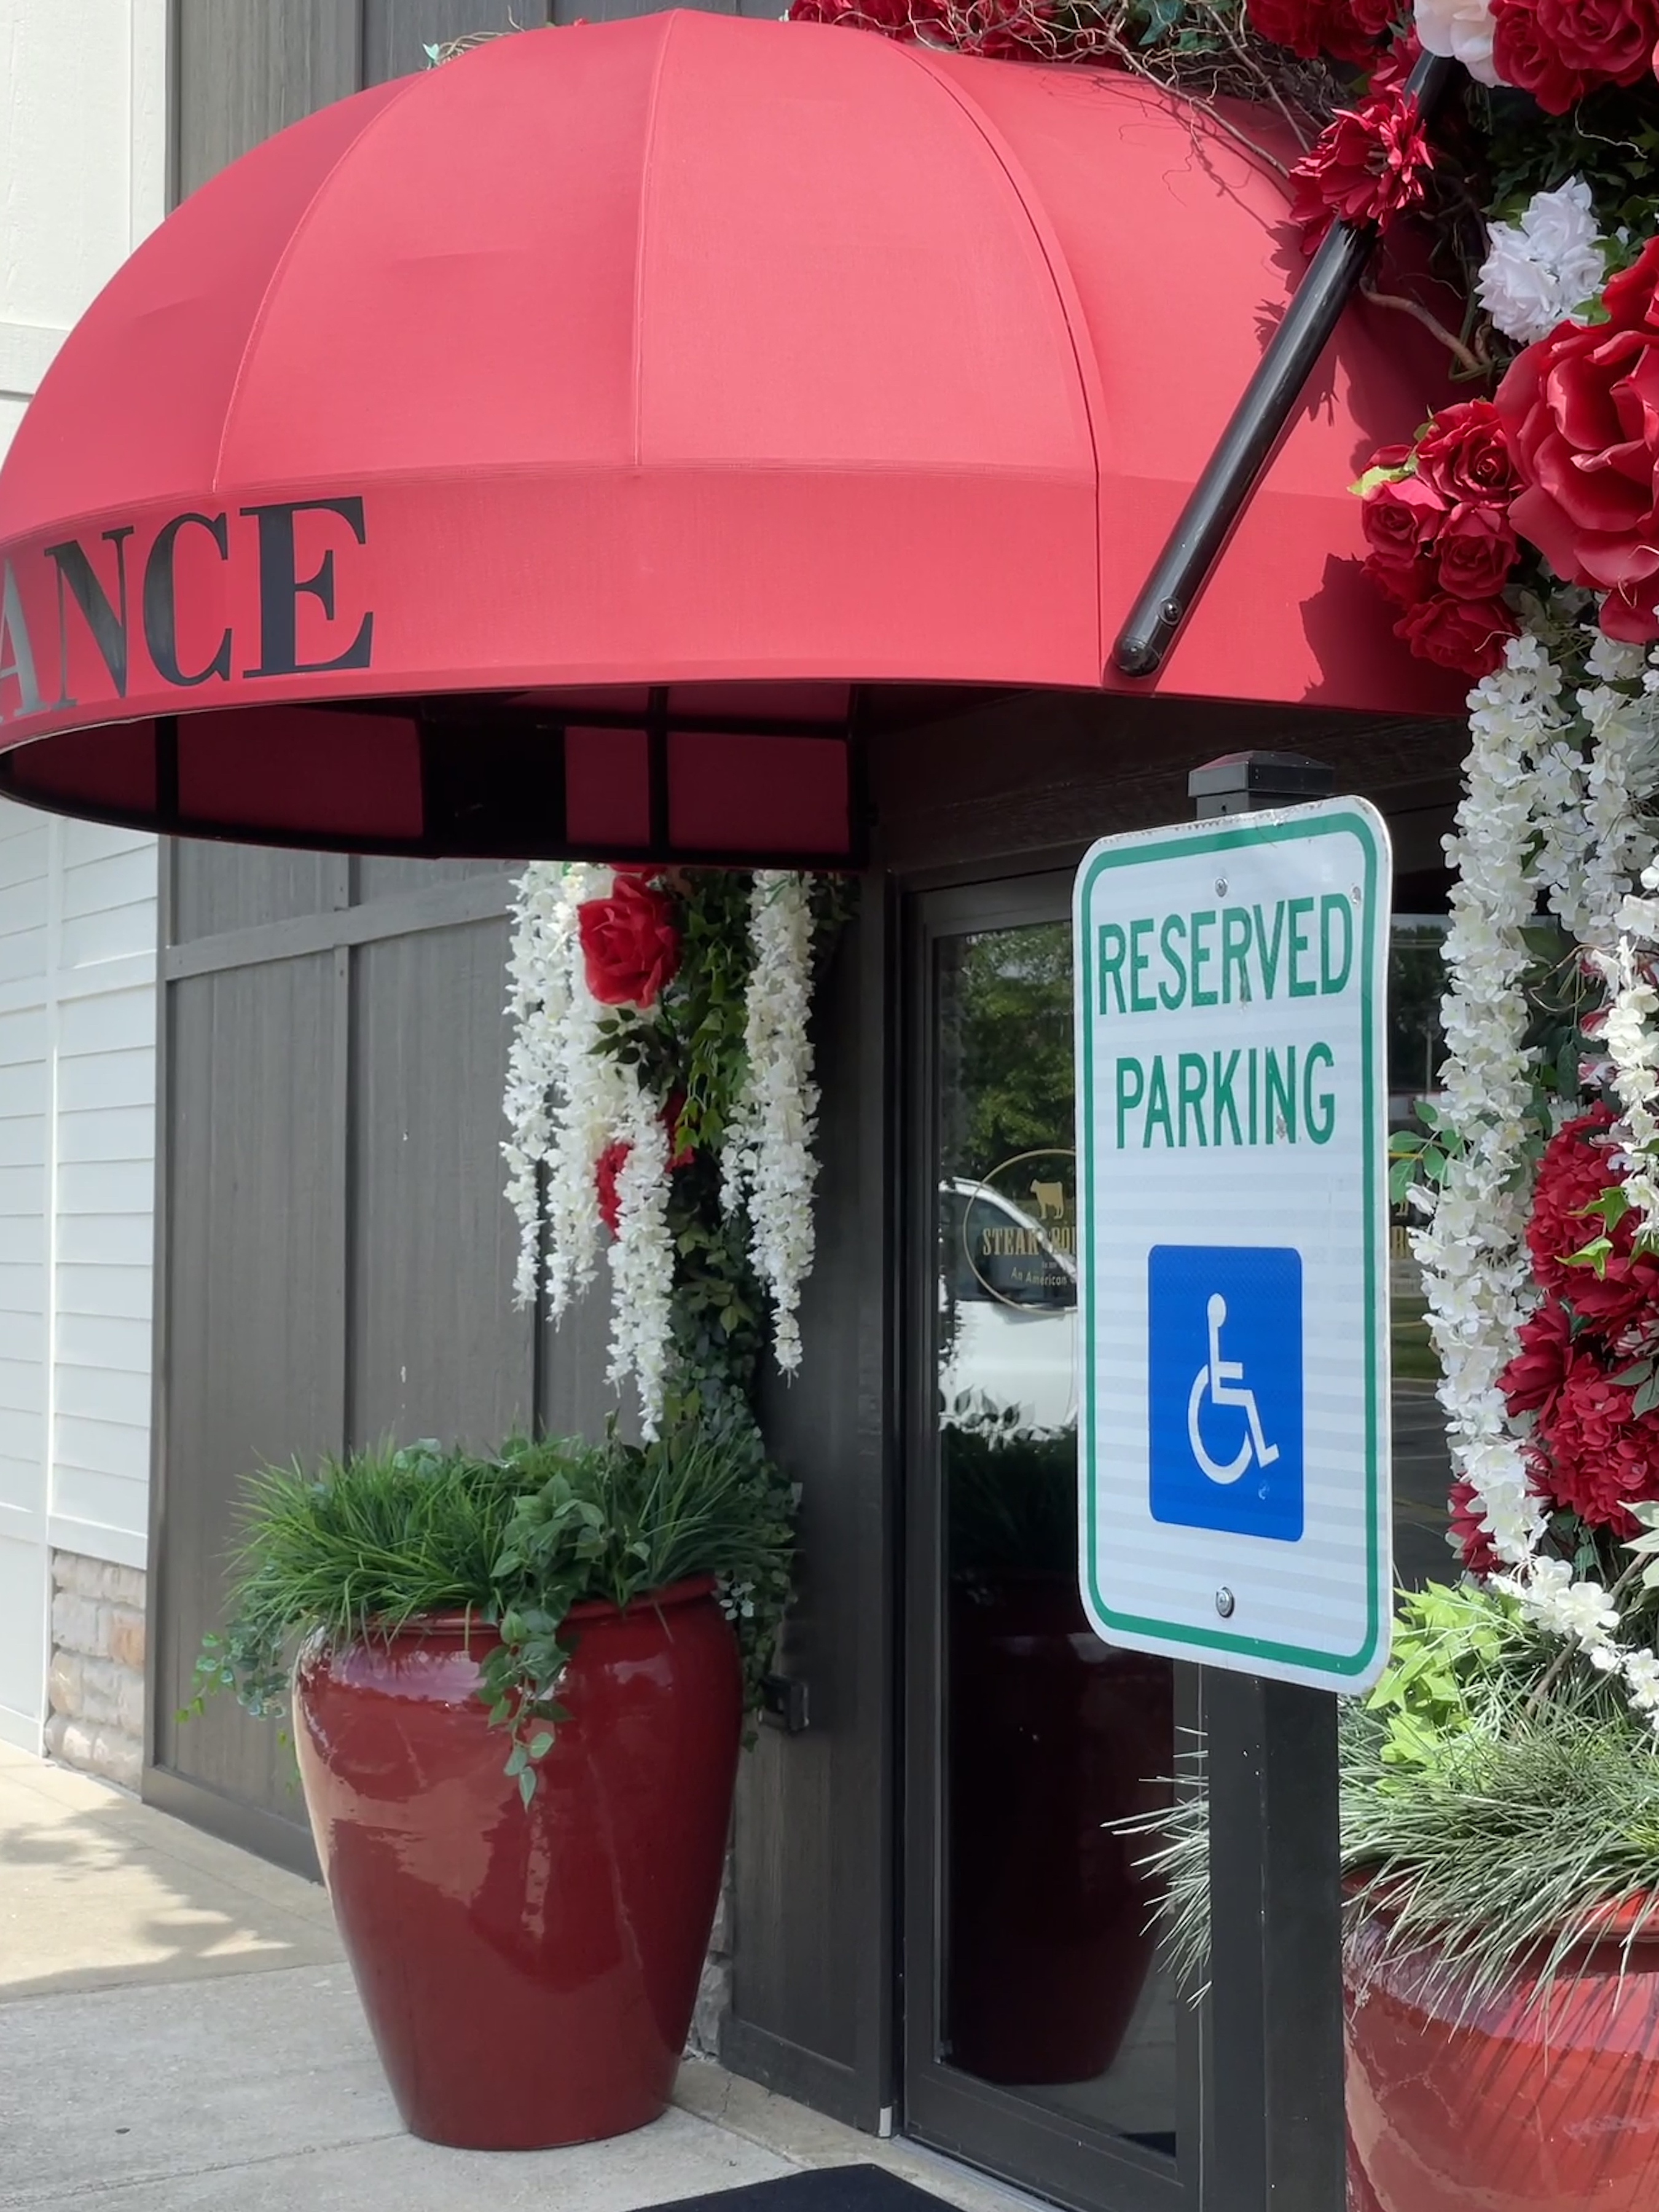 Steak & Bourbon in Westport Village demonstrates easy access, with reserved parking spaces for disabled drivers located adjacent to the accessible main entrance.